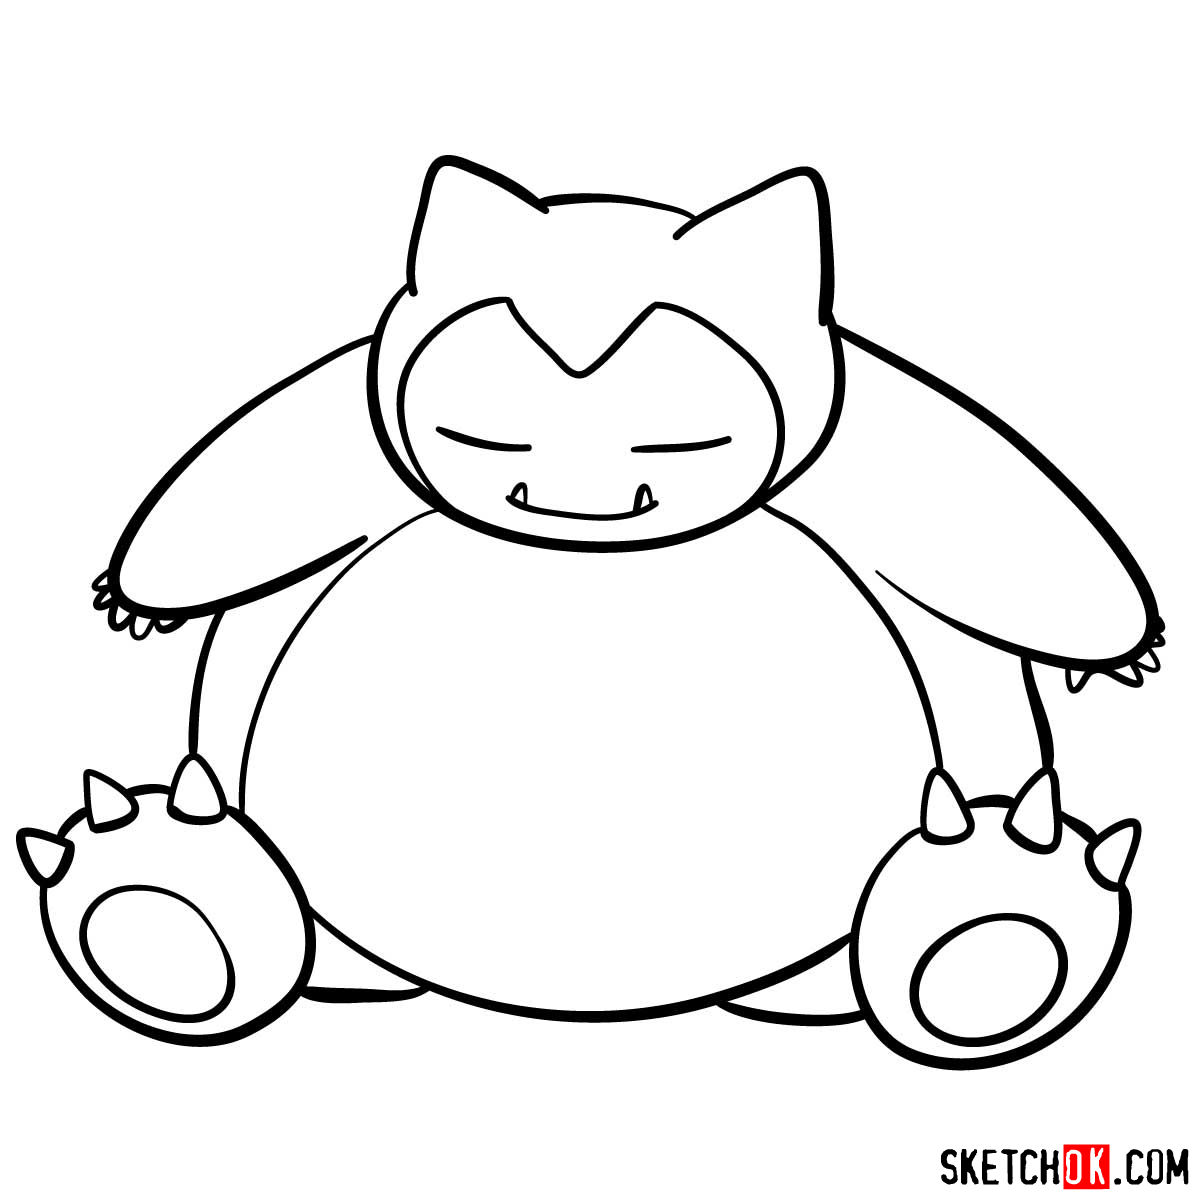 Step-by-step drawing guide of Snorlax.